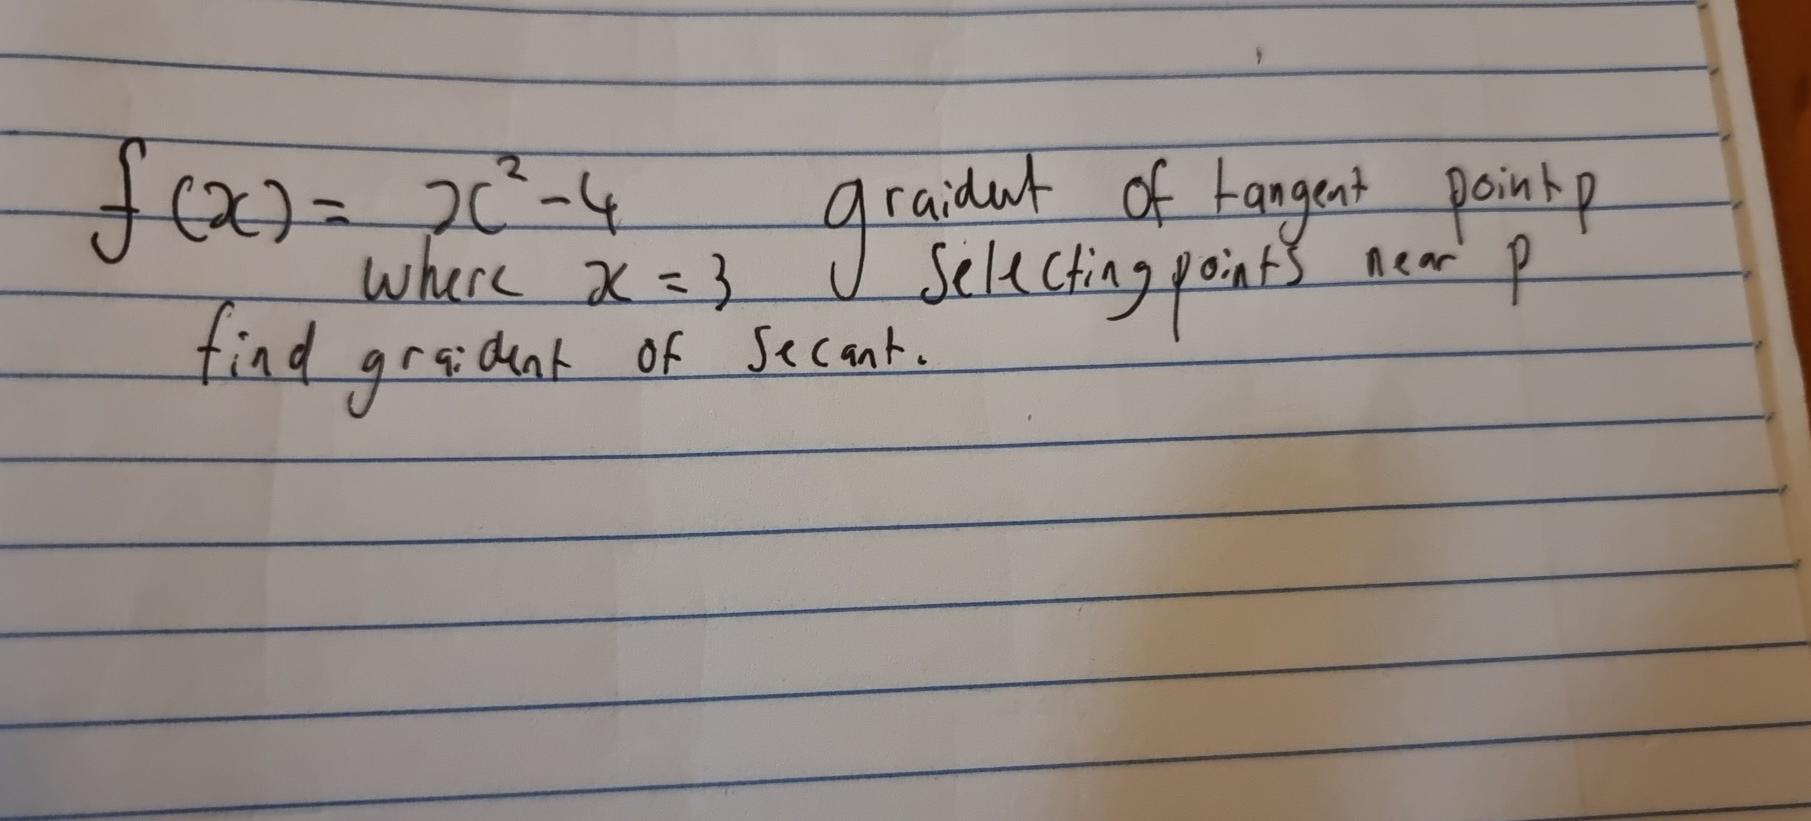 F 22 2c 4 Raident Of Tangent Point P Groselecting Points Where X 3 P Find Gredent Graident Of Secant 1